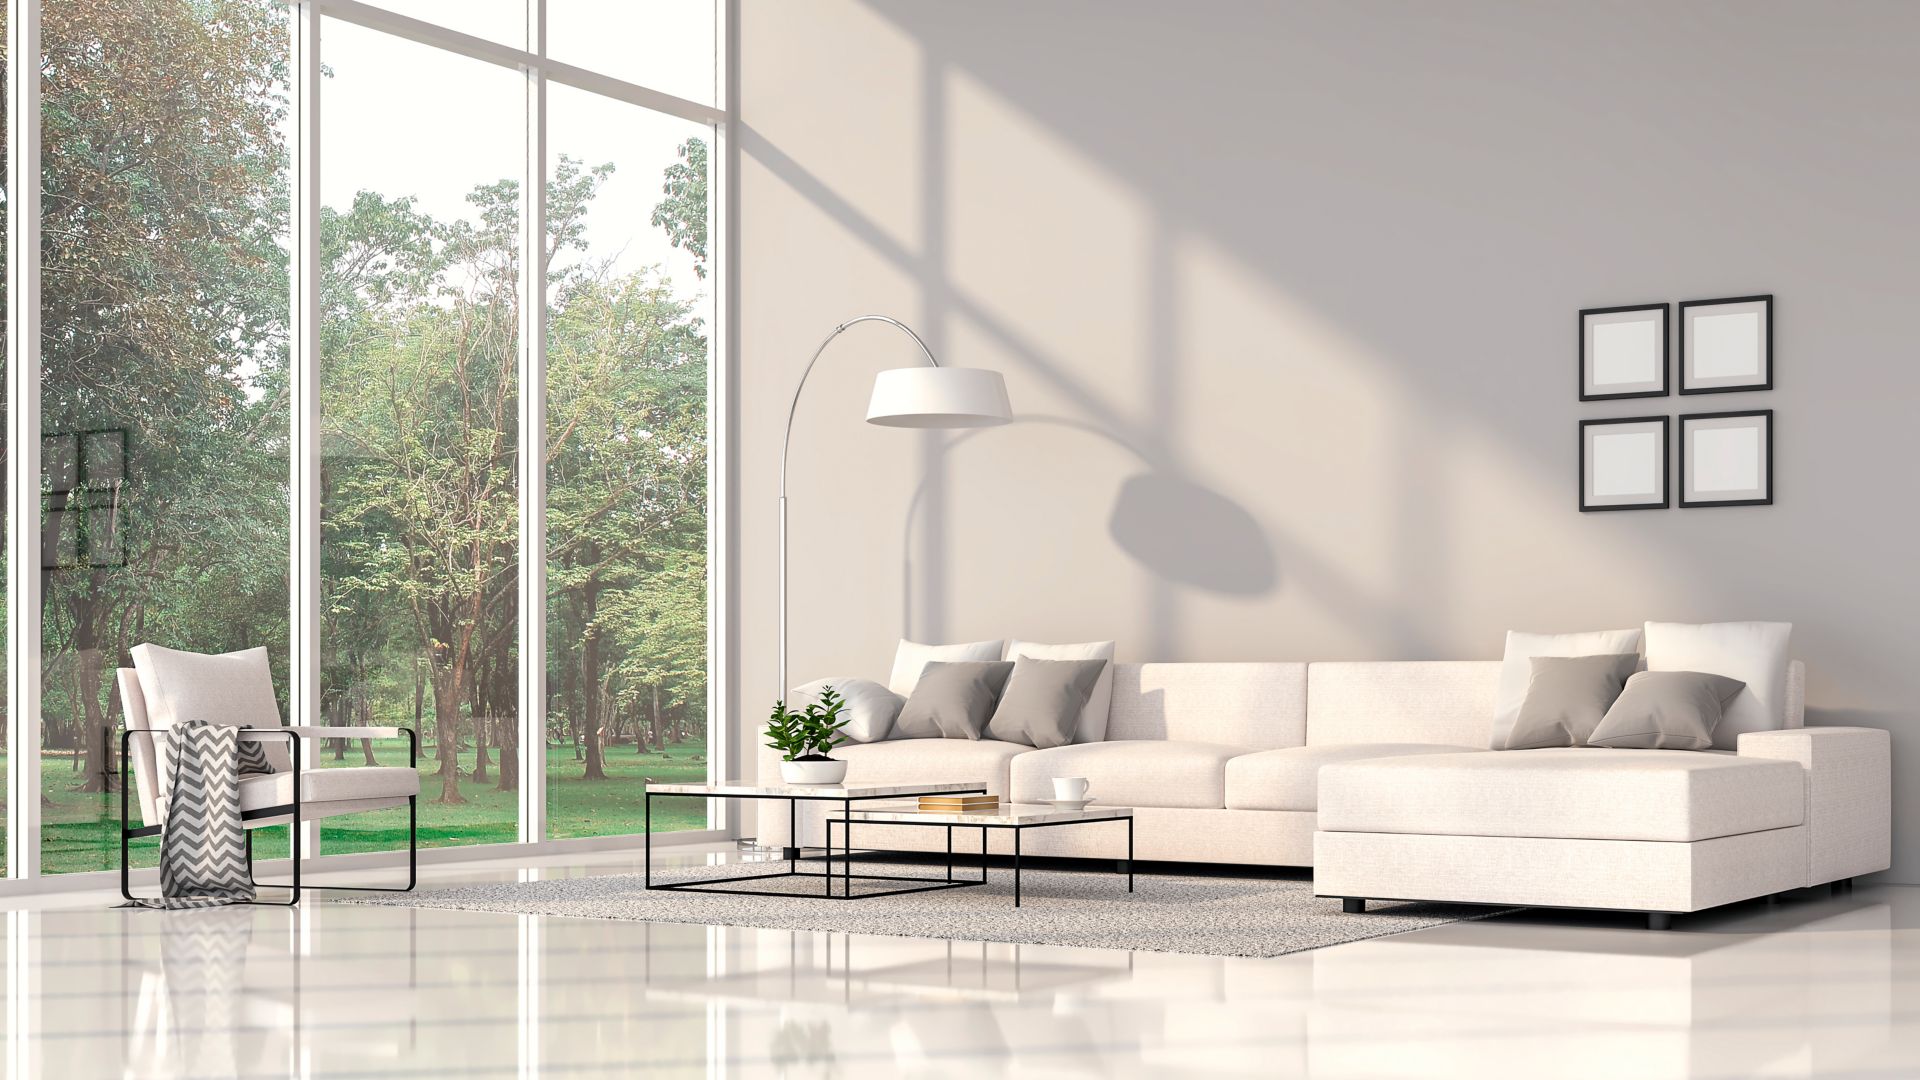 Modern living room interior 3d render.The Rooms have white floors and gray wall.furnished with white fabric furniture.There are large window. Overlooks to nature view.